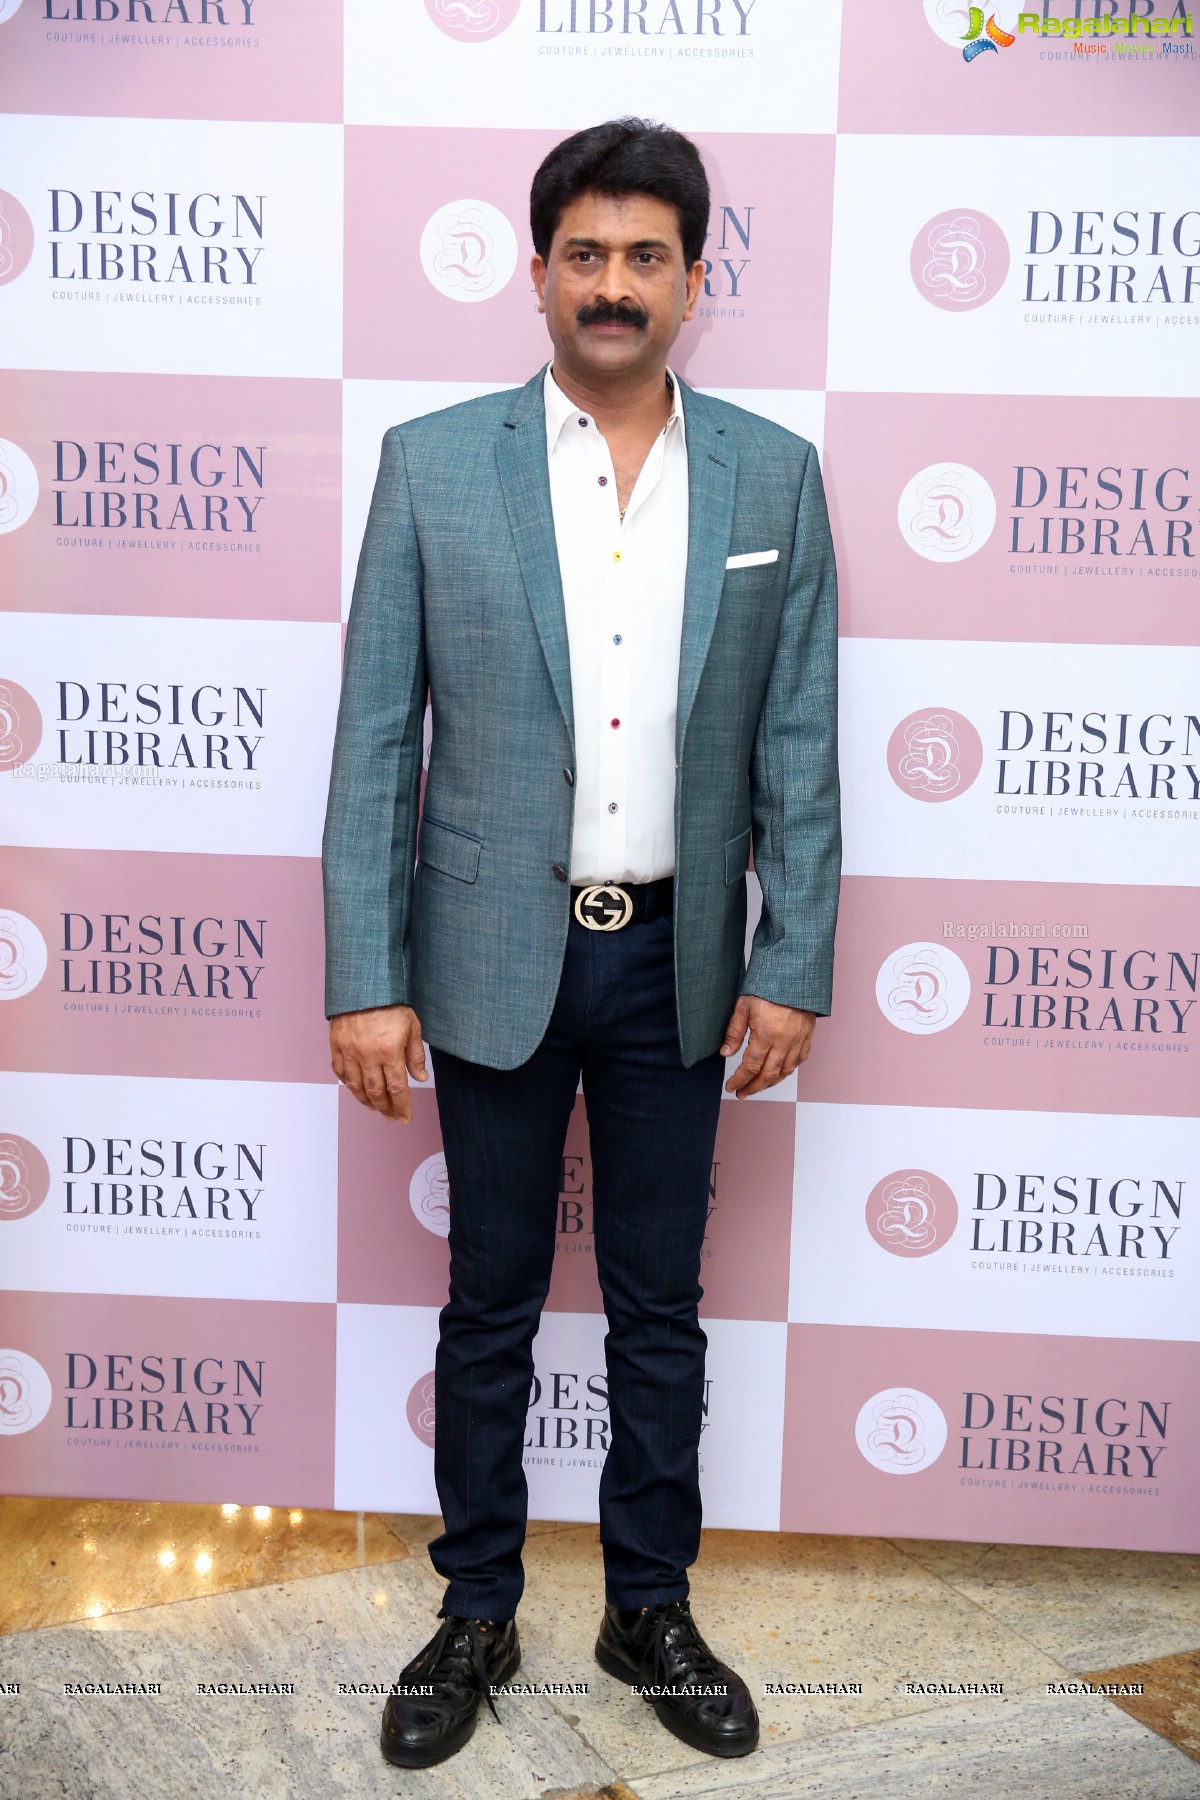 Design Library Grand Launch at HICC (Novotel), Hyderabad